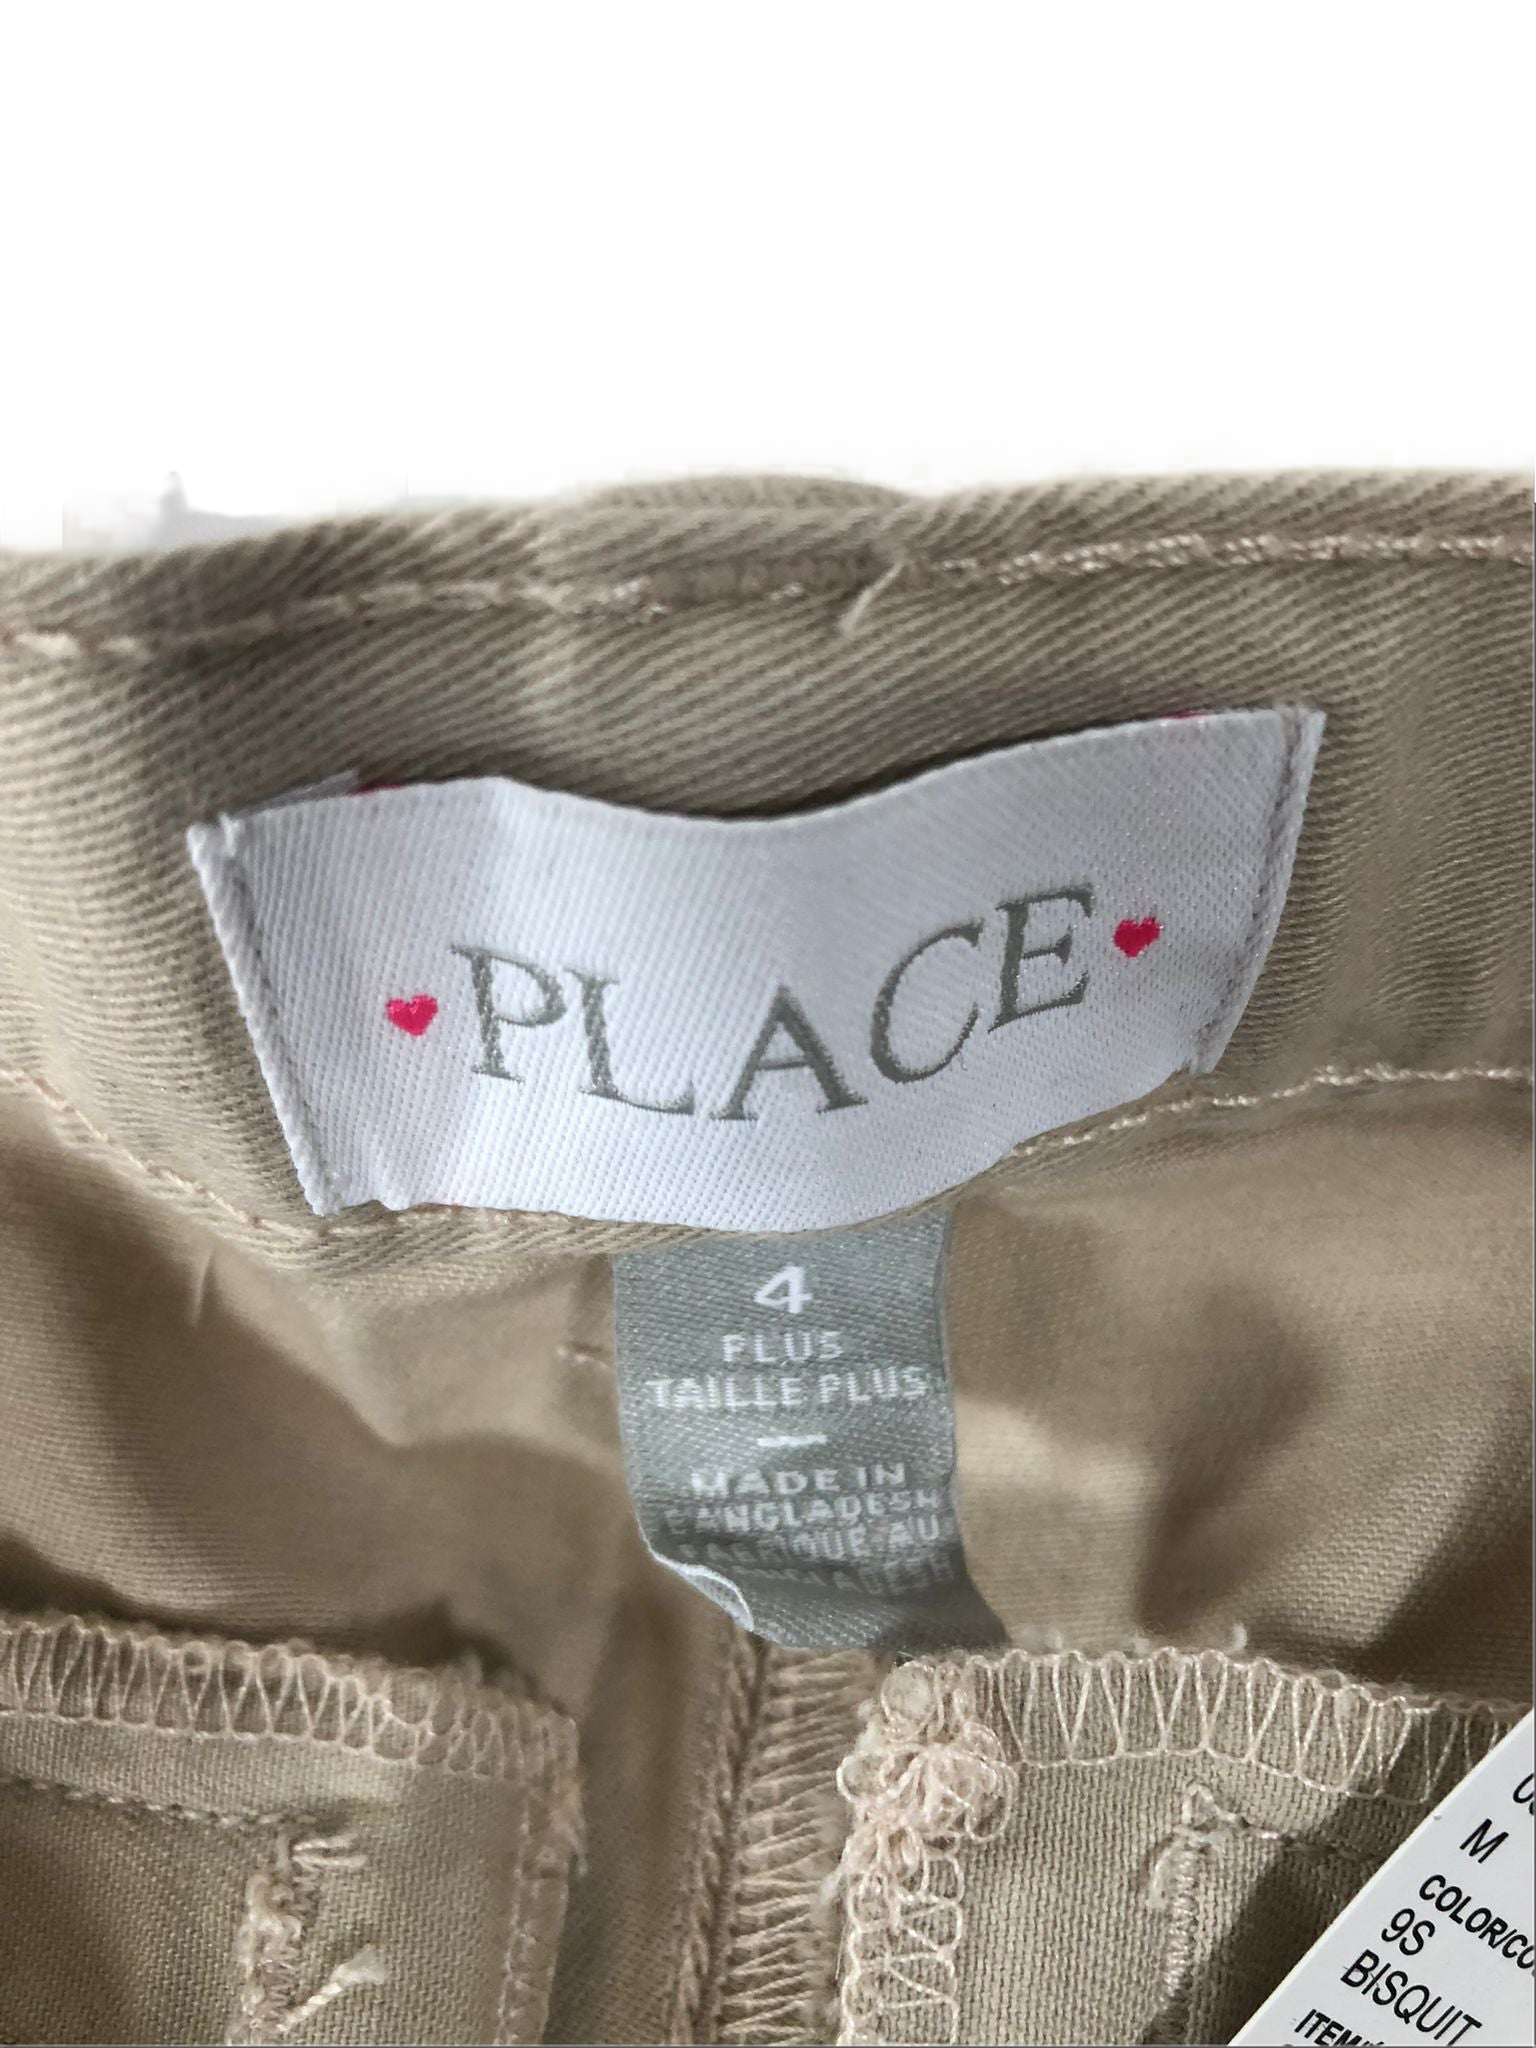 The Children's Place Girl's Chino Shorts